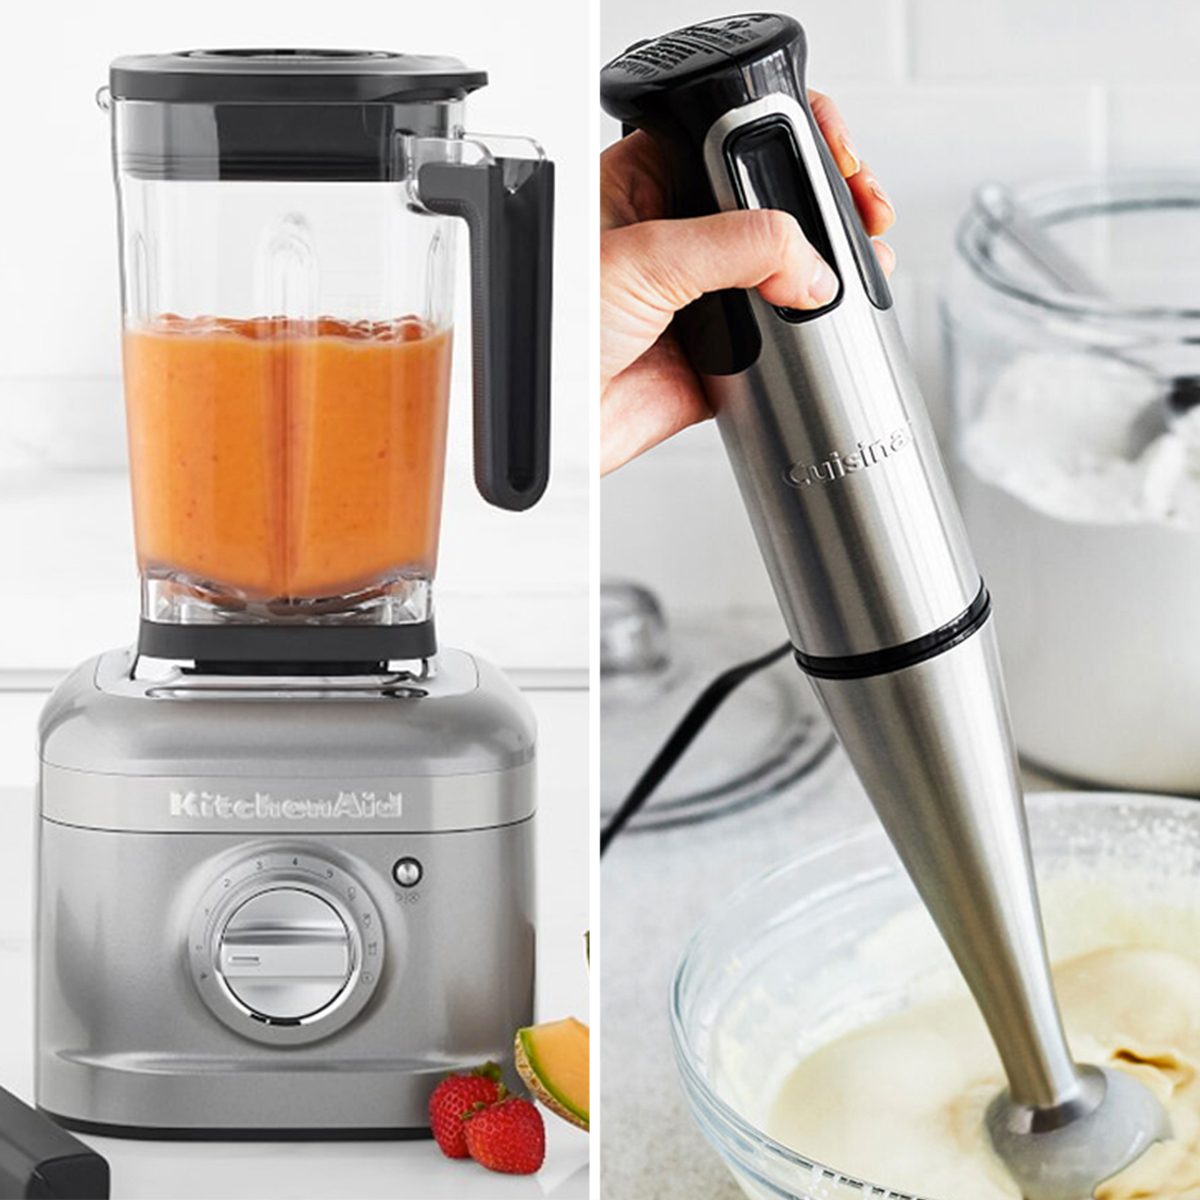 What is the difference between a mixer and a blender? - Quora